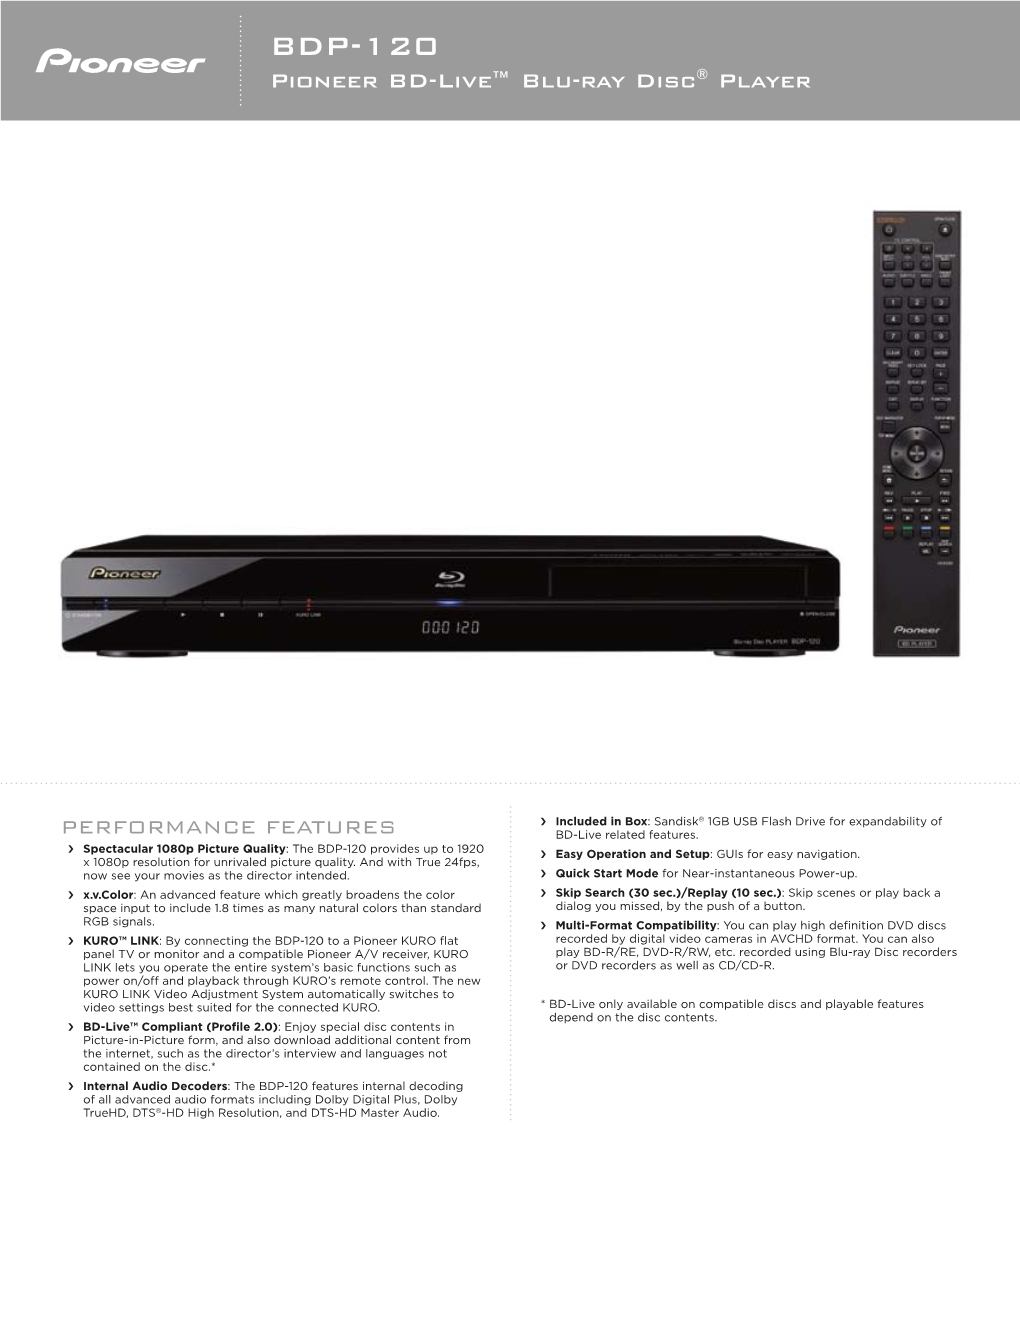 BDP-120 Pioneer BD-Live™ Blu-Ray Disc® Player